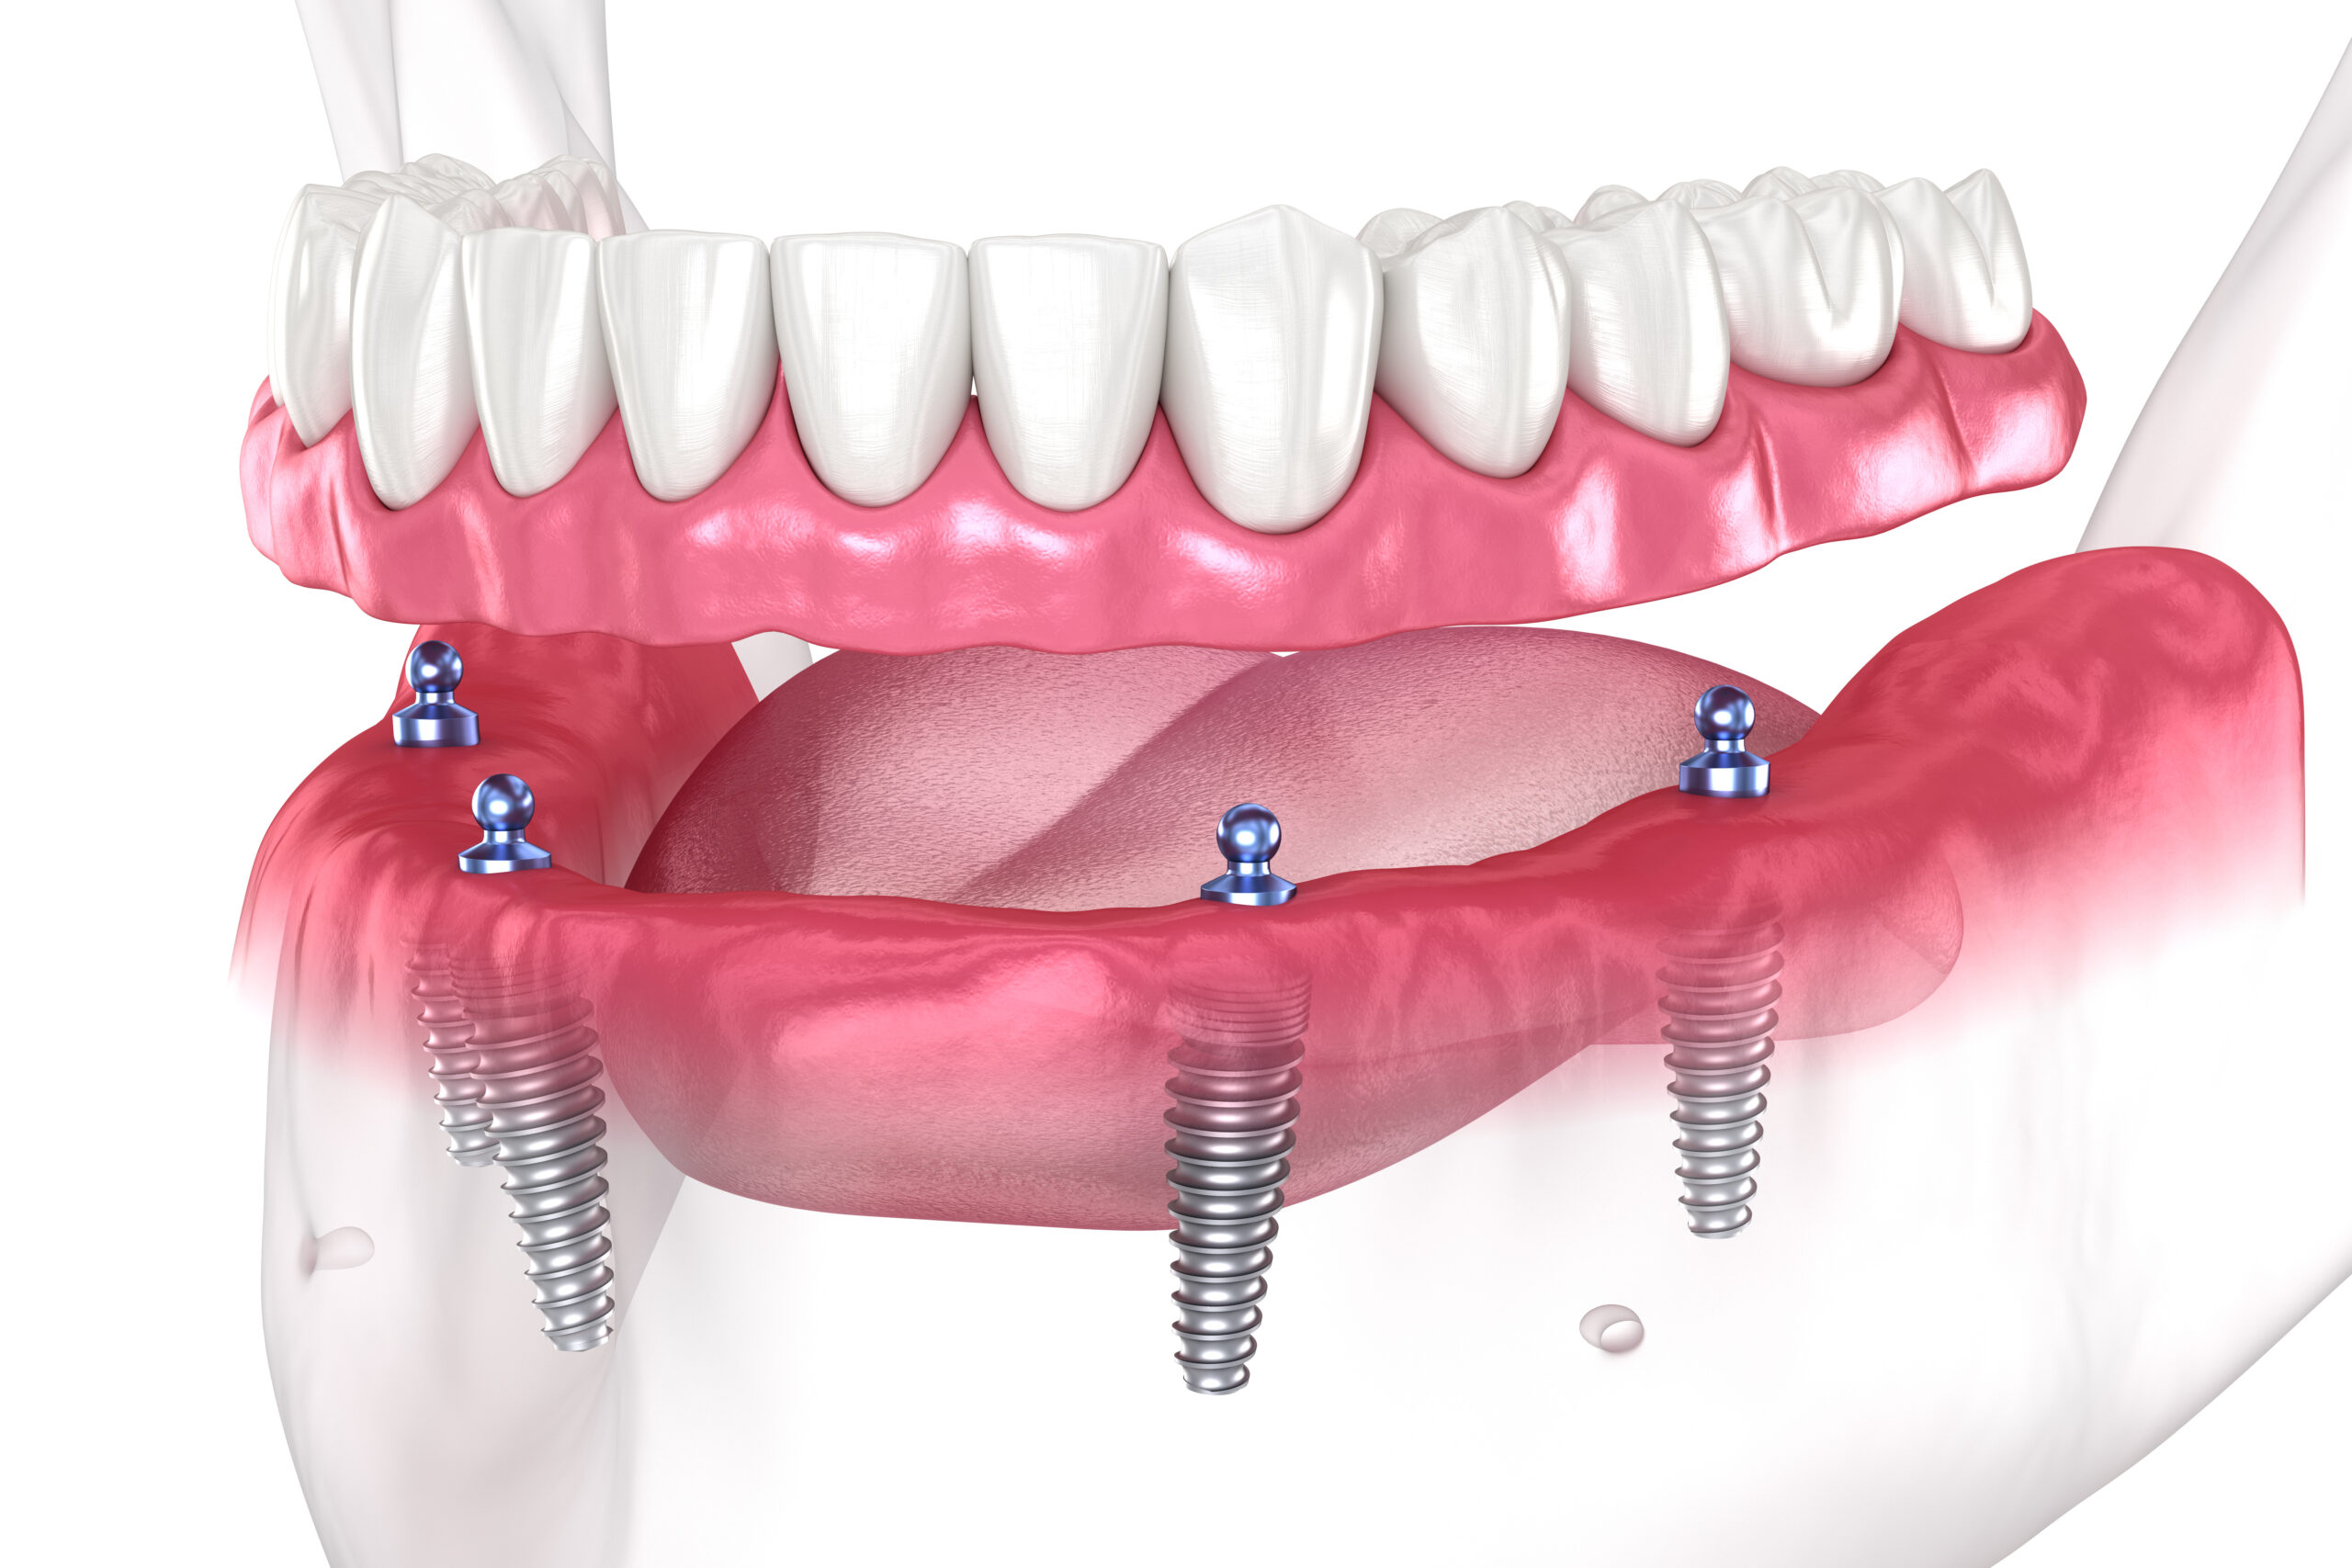 Am I Going To Benefit From Getting Treated With Full Mouth Dental Implants In Missoula, MT?